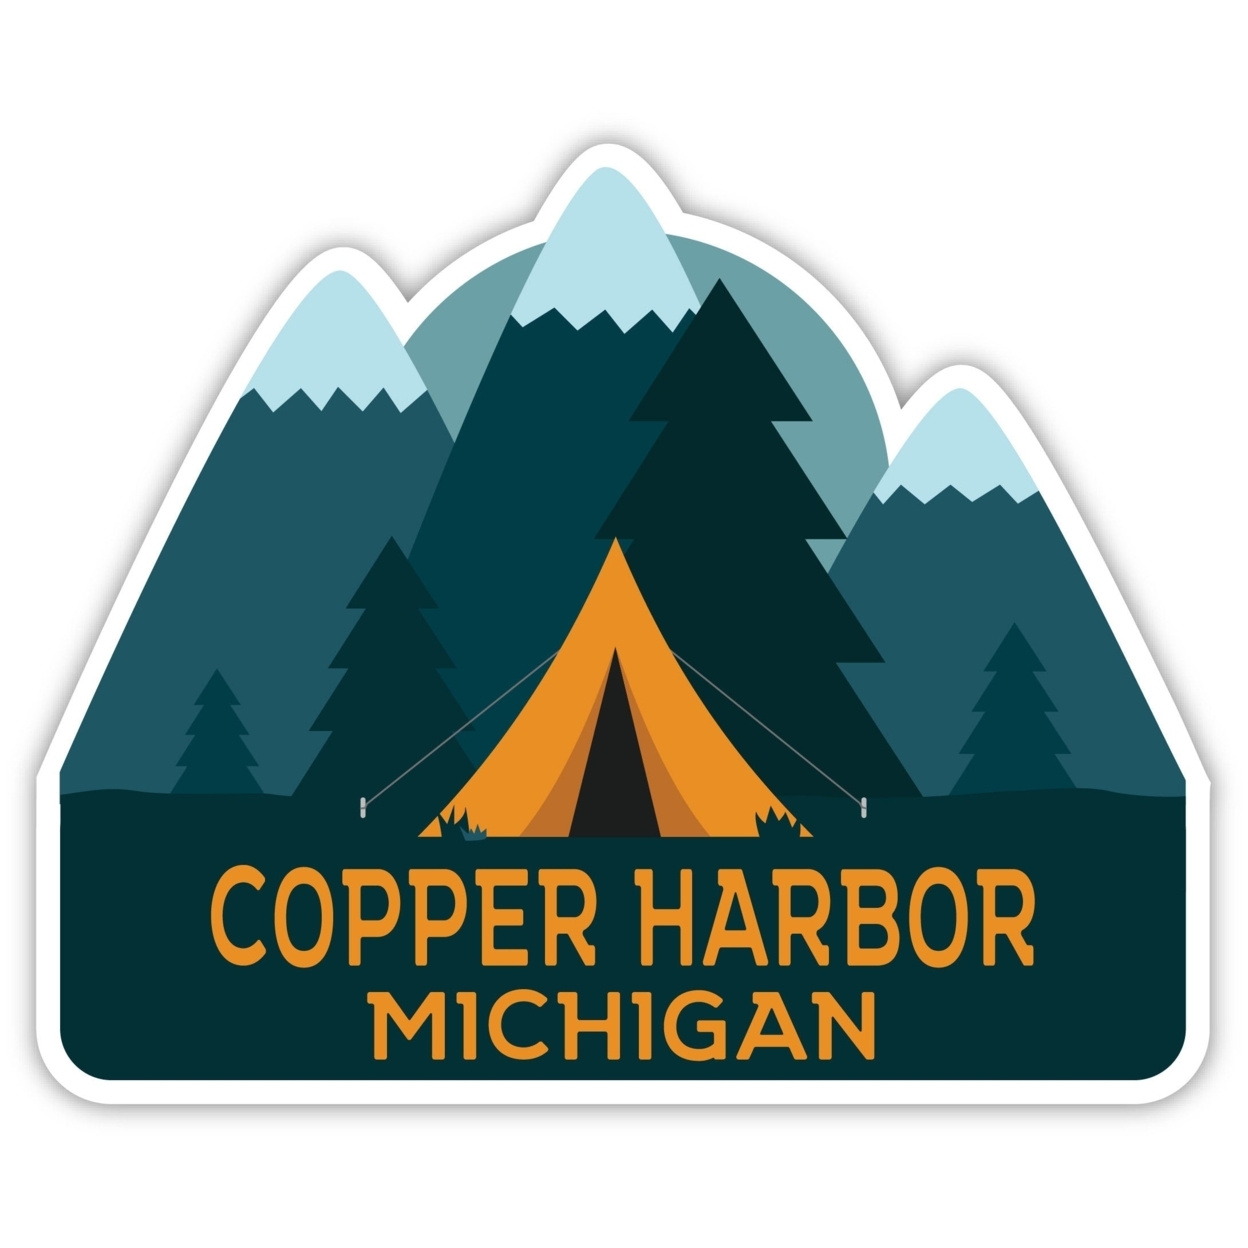 Copper Harbor Michigan Souvenir Decorative Stickers (Choose Theme And Size) - 4-Pack, 2-Inch, Adventures Awaits